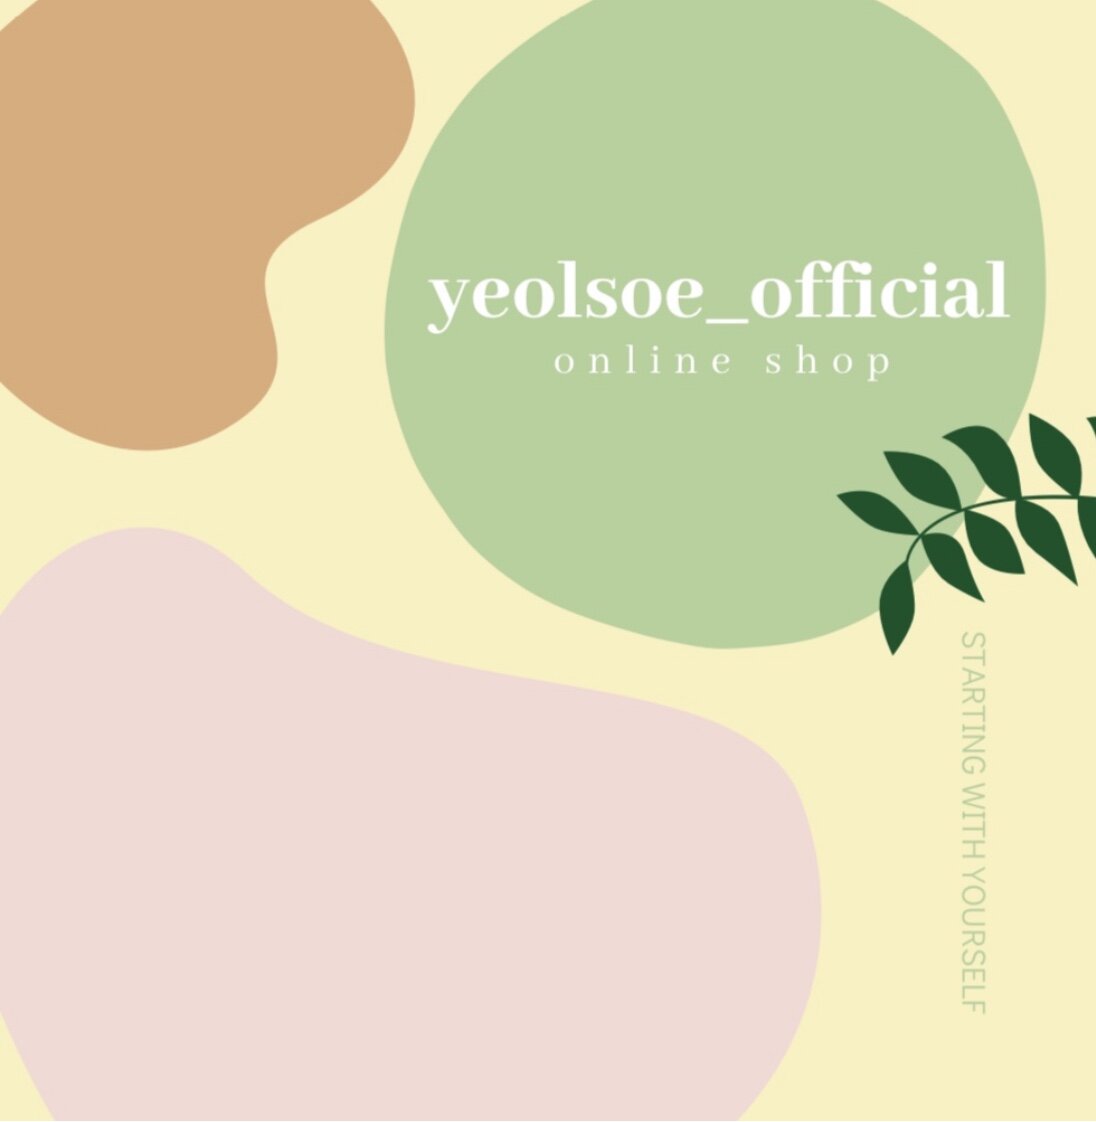 yeolsoe_official_logo.PNG